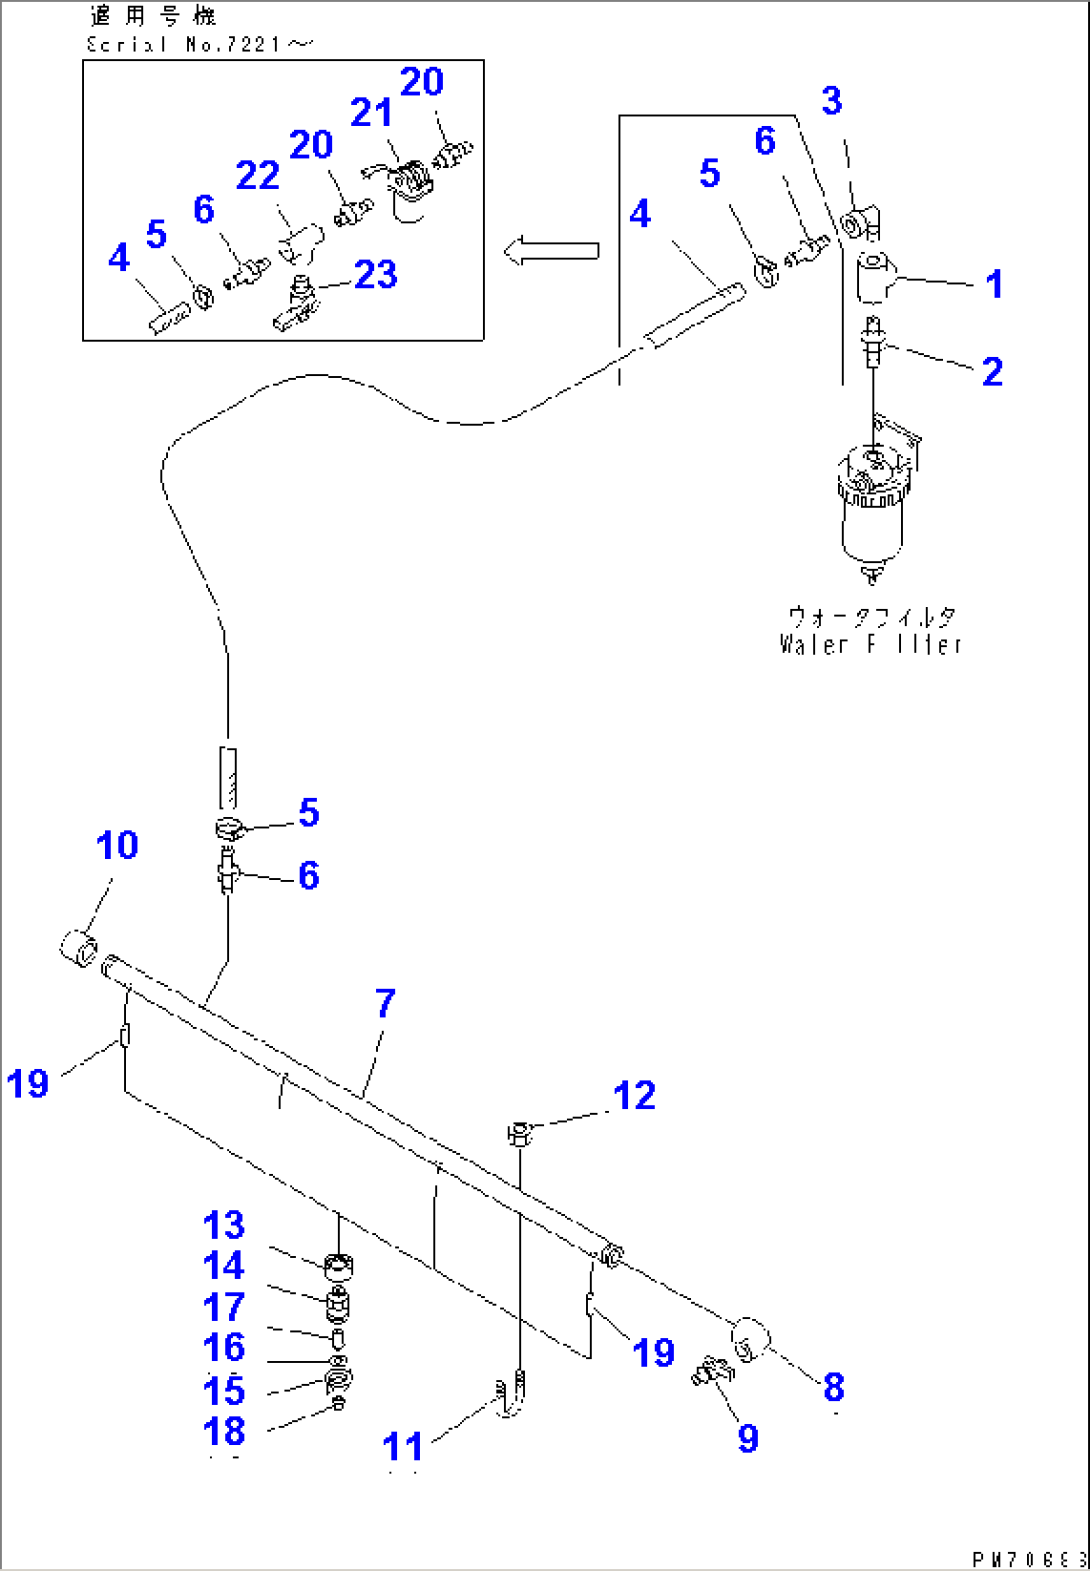 WATER PIPING (3/5) (FRONT NOZZLE LINE)